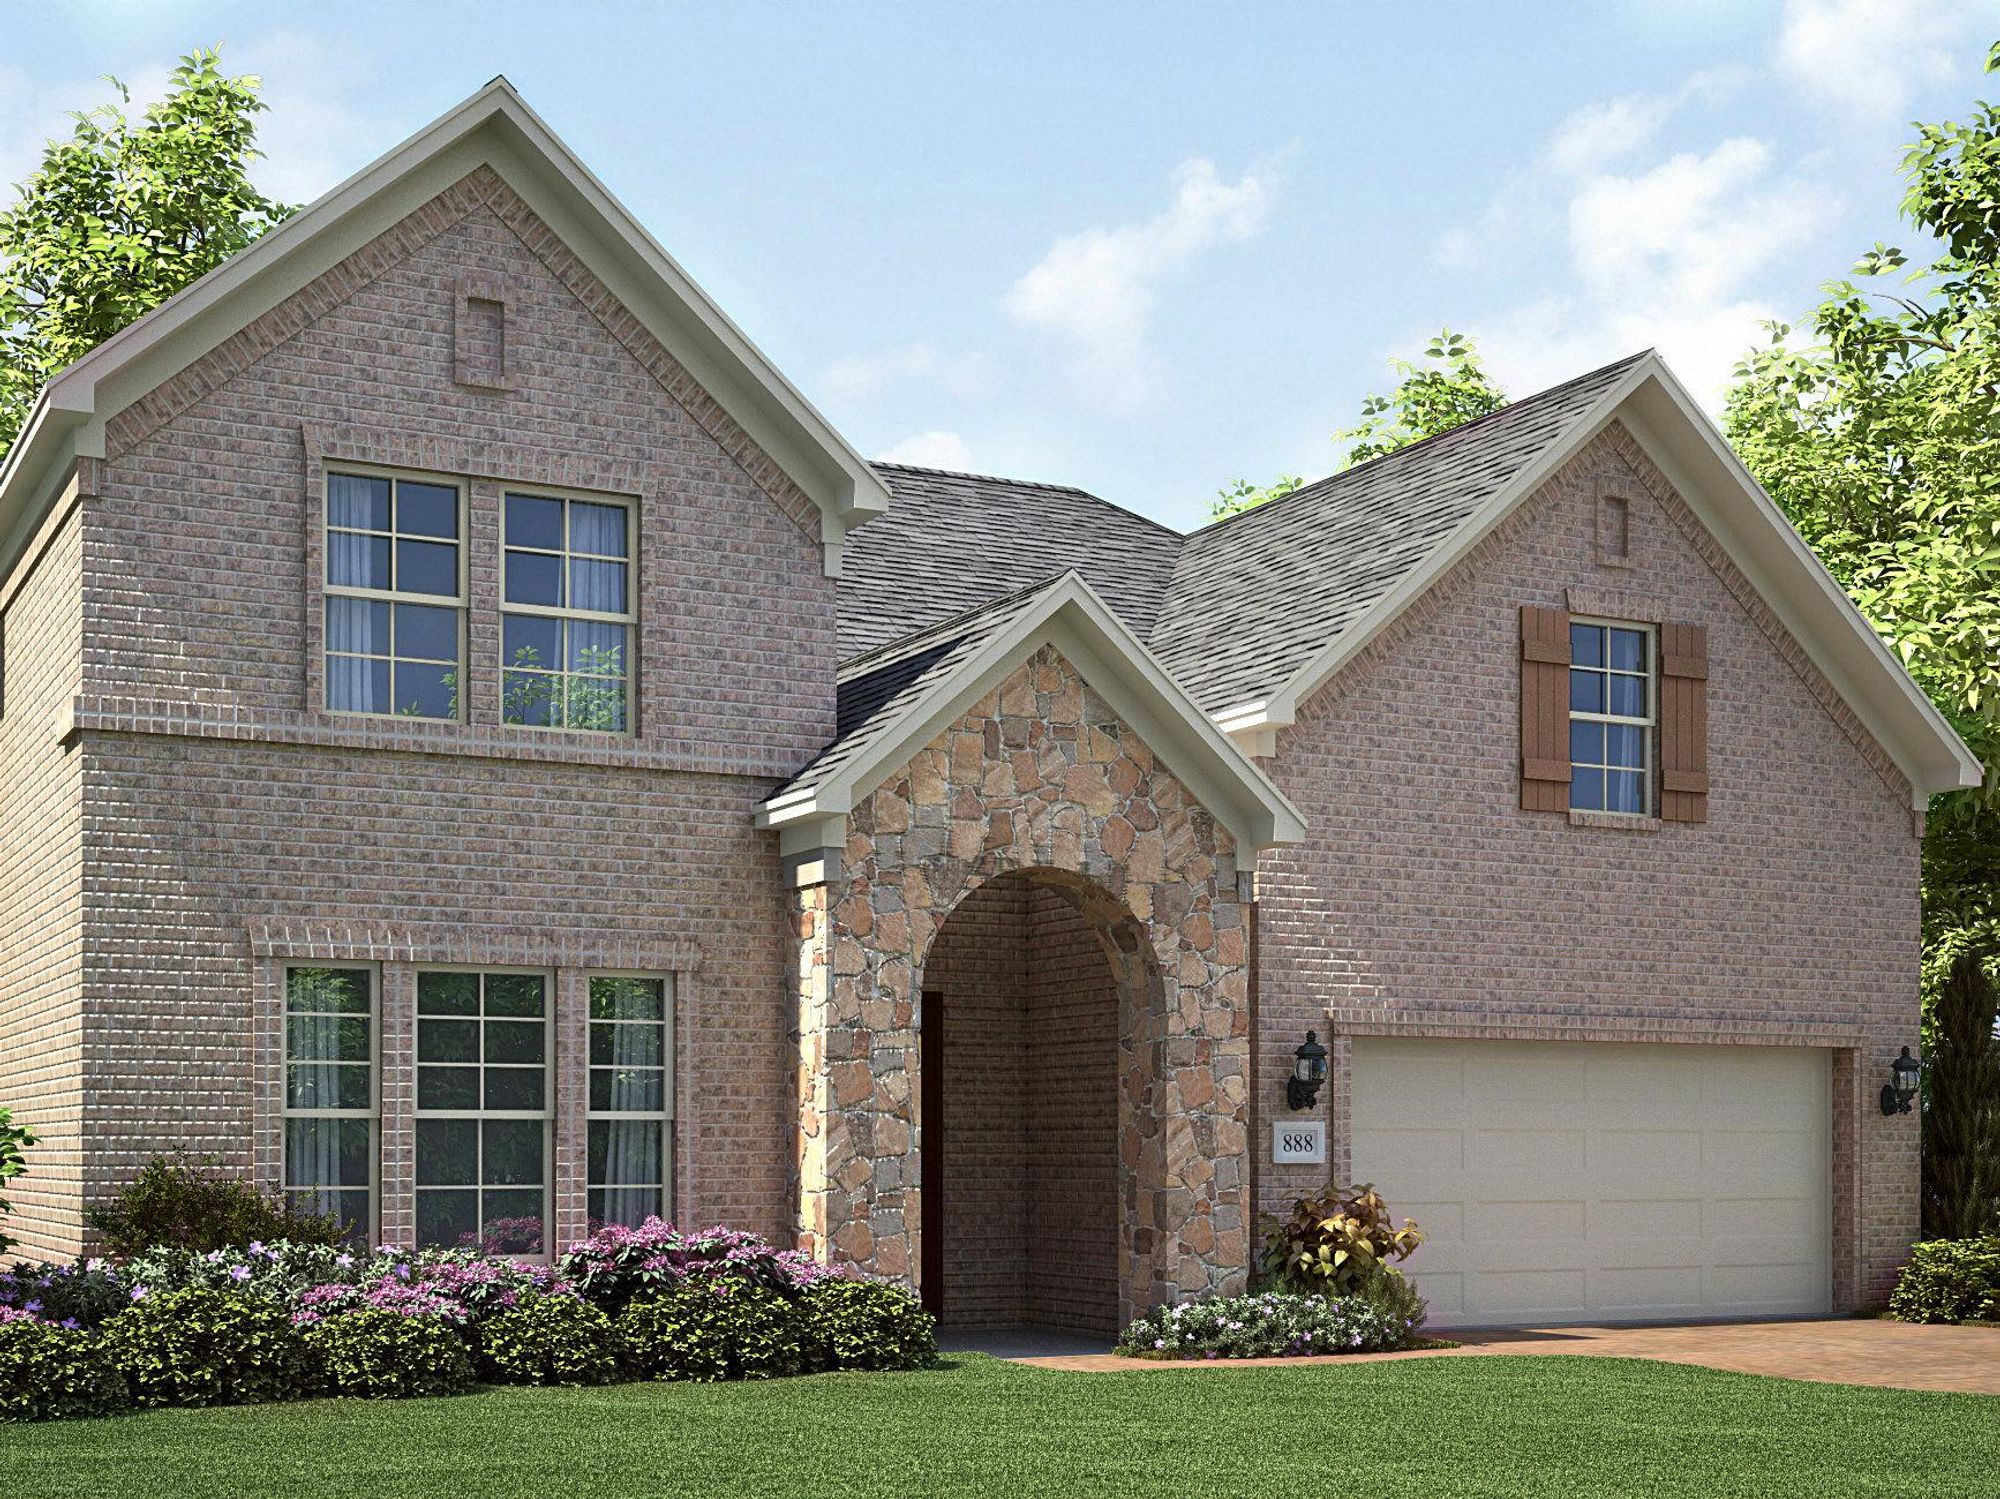 The Tuscany model home in Northwest Fort Worth